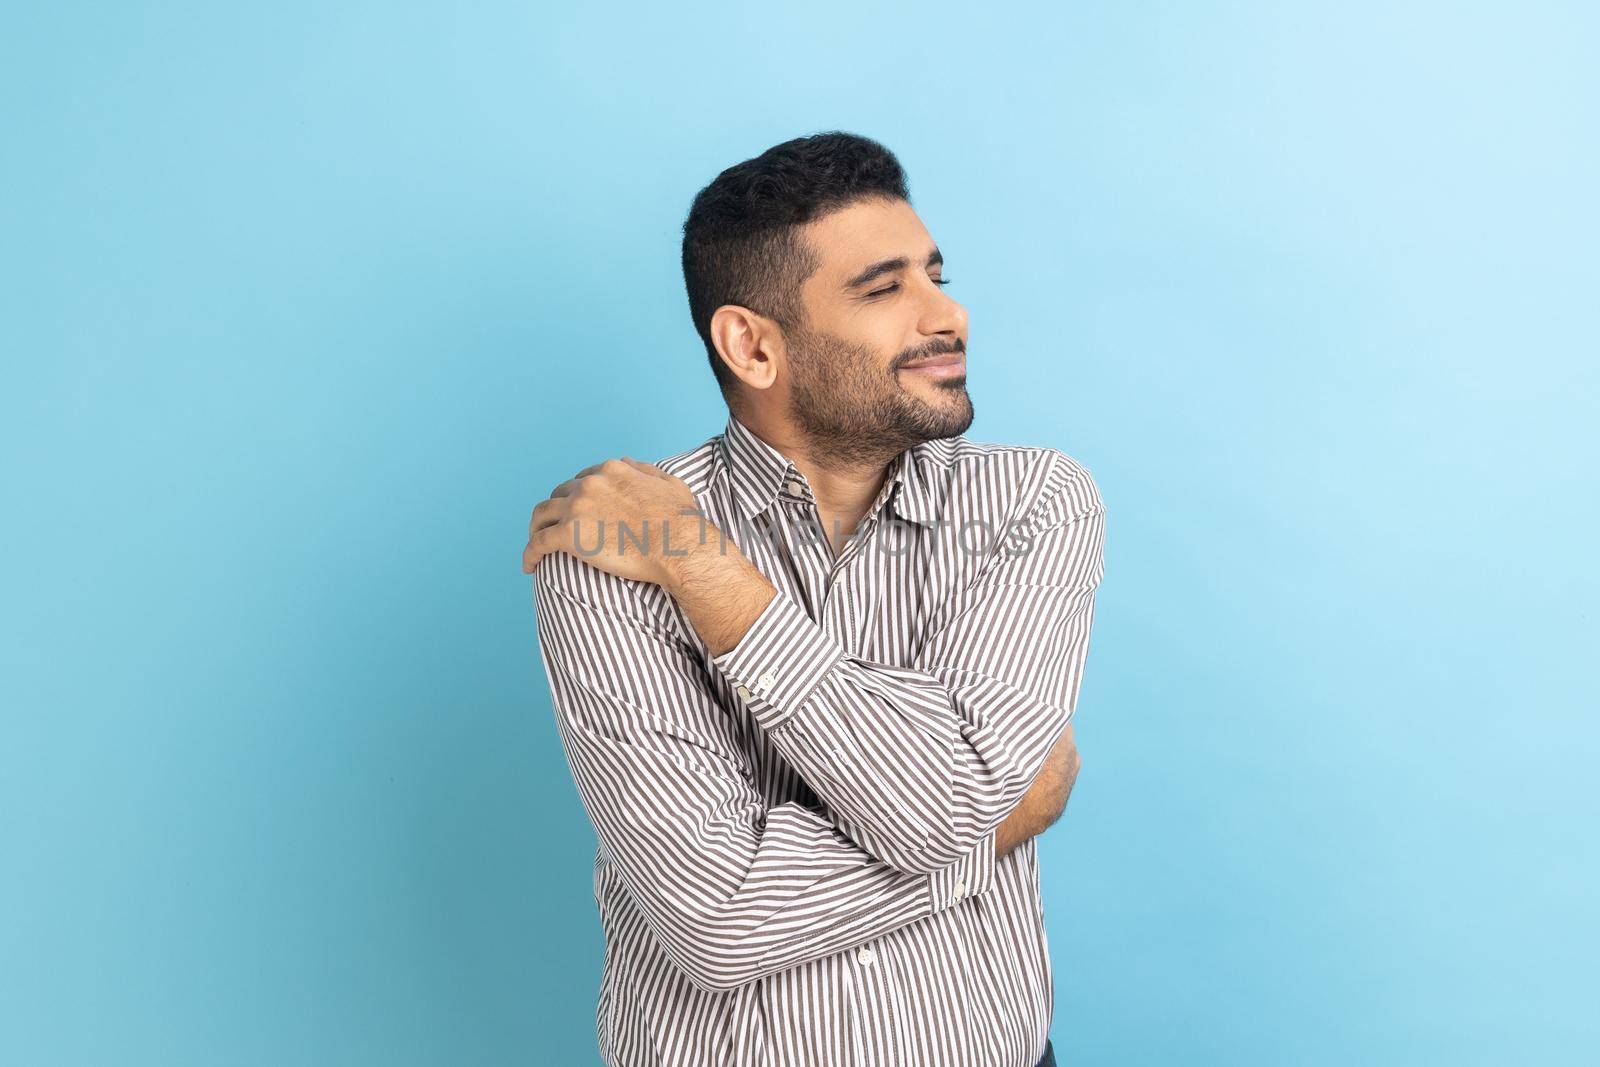 Businessman with beard standing and hugging himself with toothy smile enjoying, positive self-esteem by Khosro1